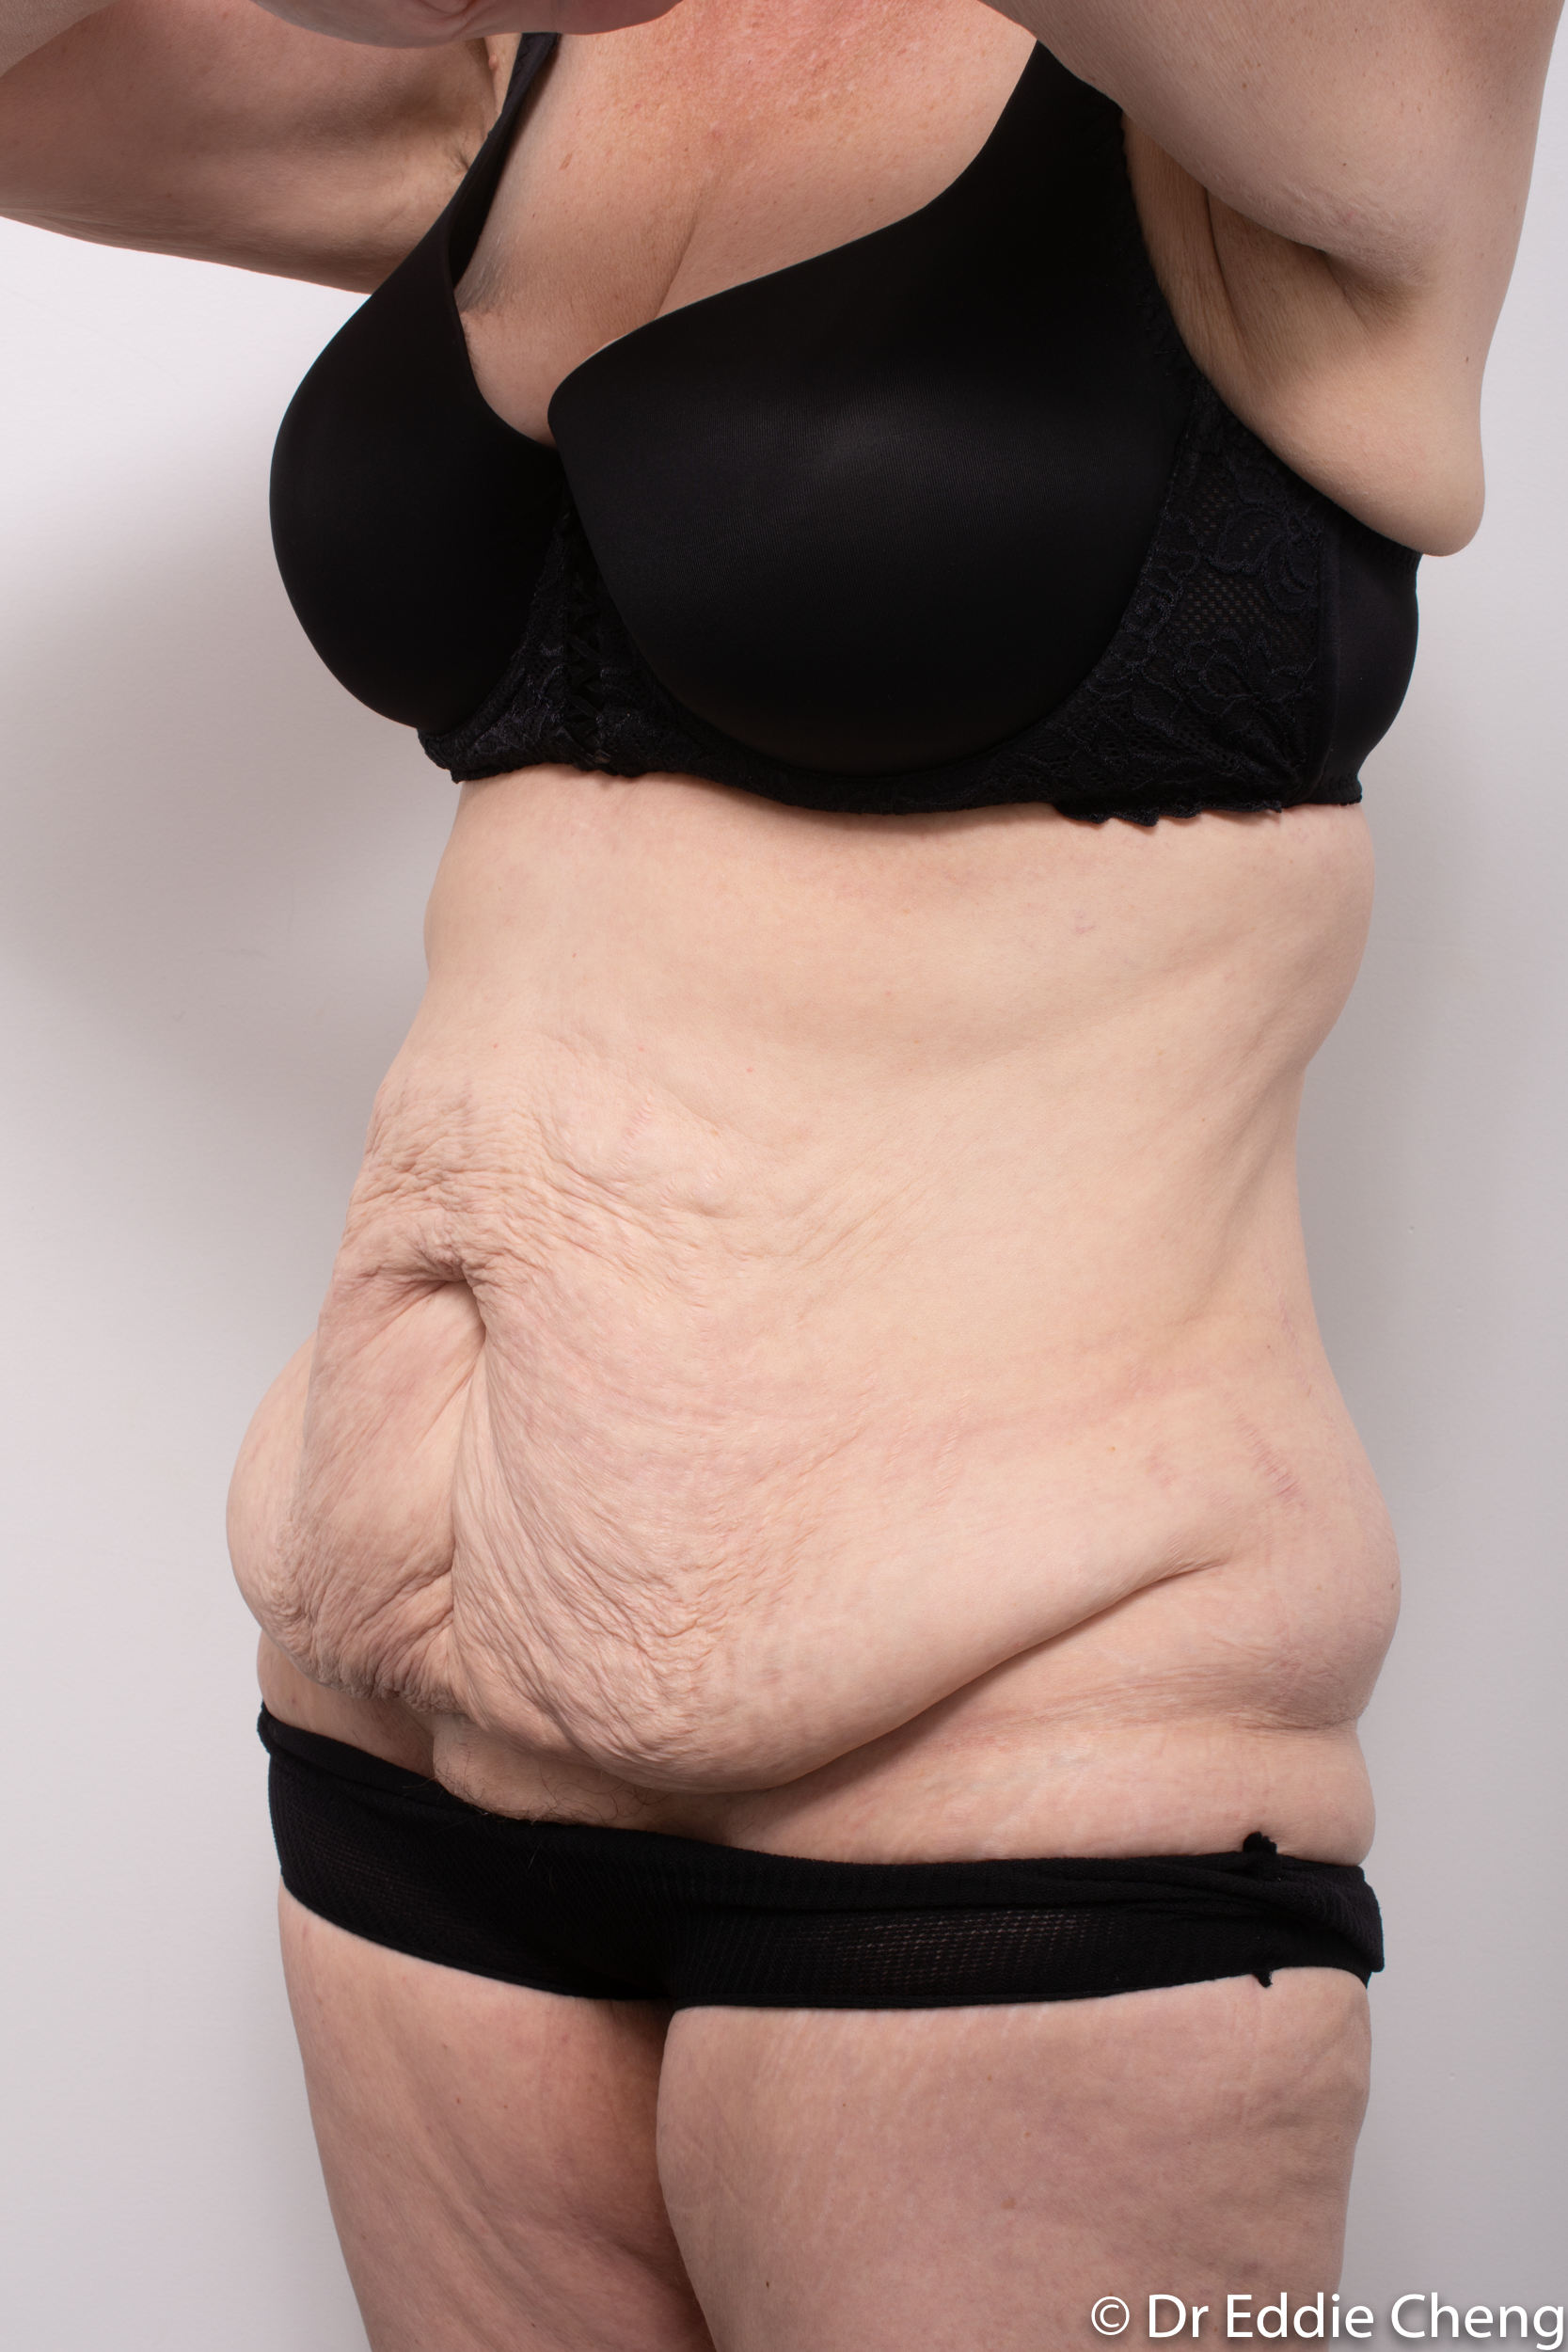 Body lift circumferential dr eddie cheng brisbane surgeon pre and post operative images -4